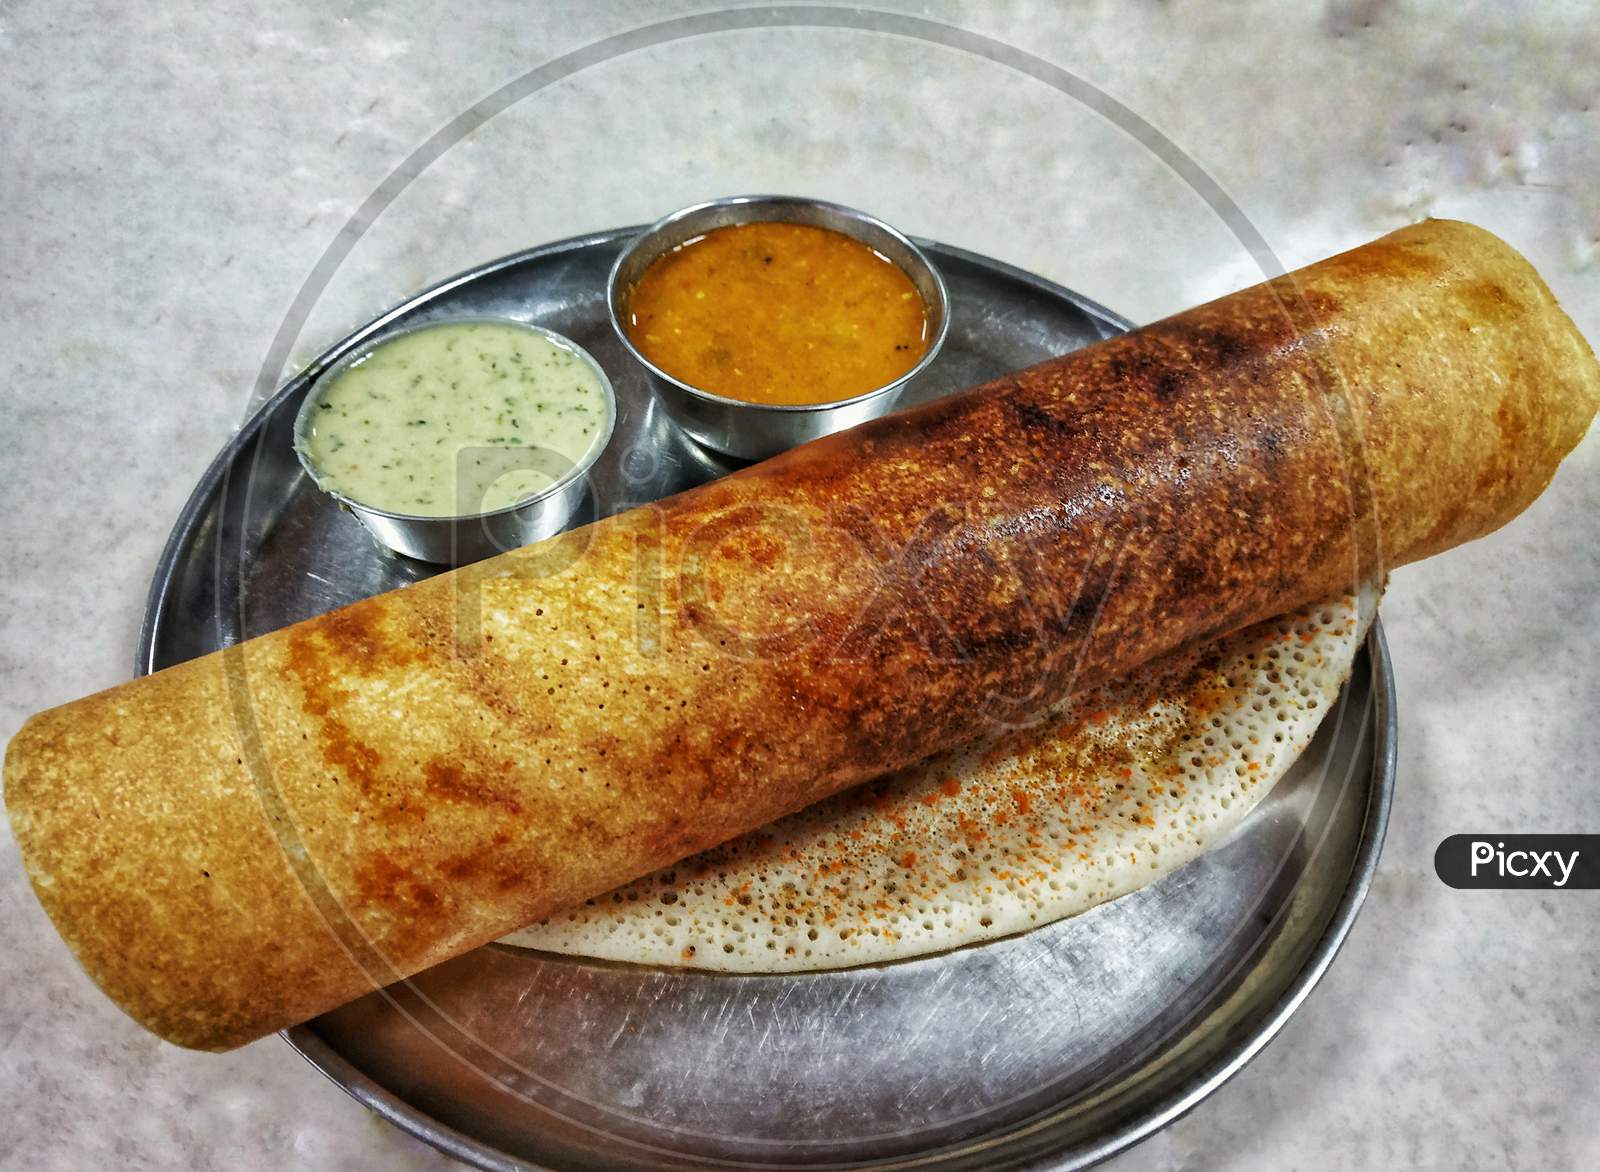 Masala Dosa With Chutney And Sambar Placed In A Steel Plate On A White Table. South Indian Breakfast.